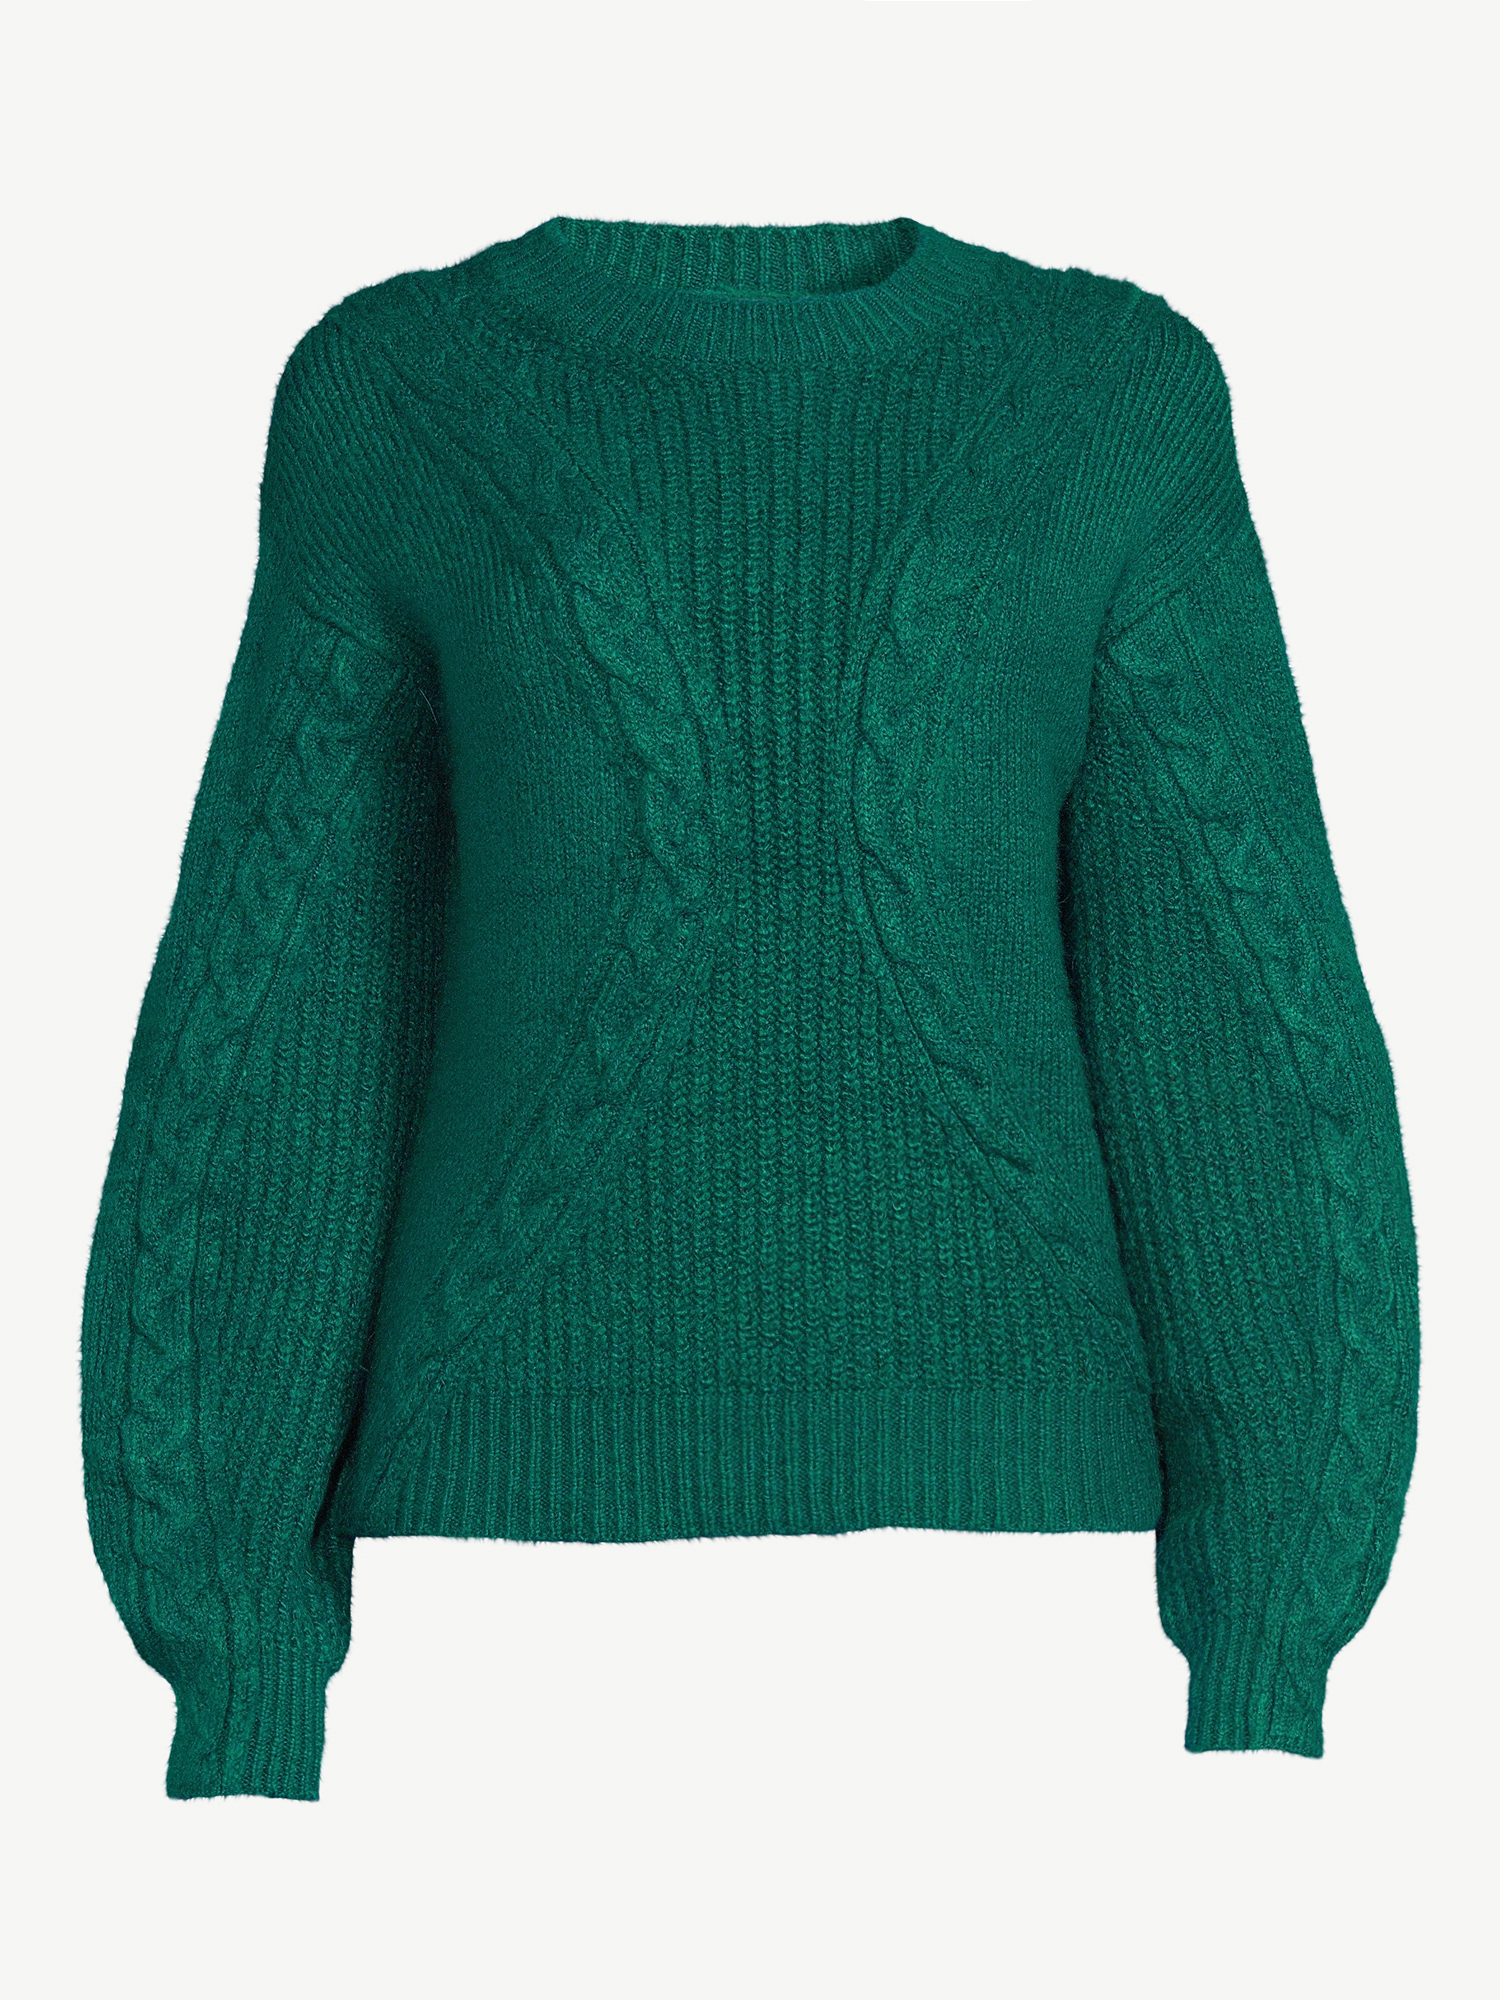 Scoop Women's Textured Cable Knit Sweater - image 5 of 5